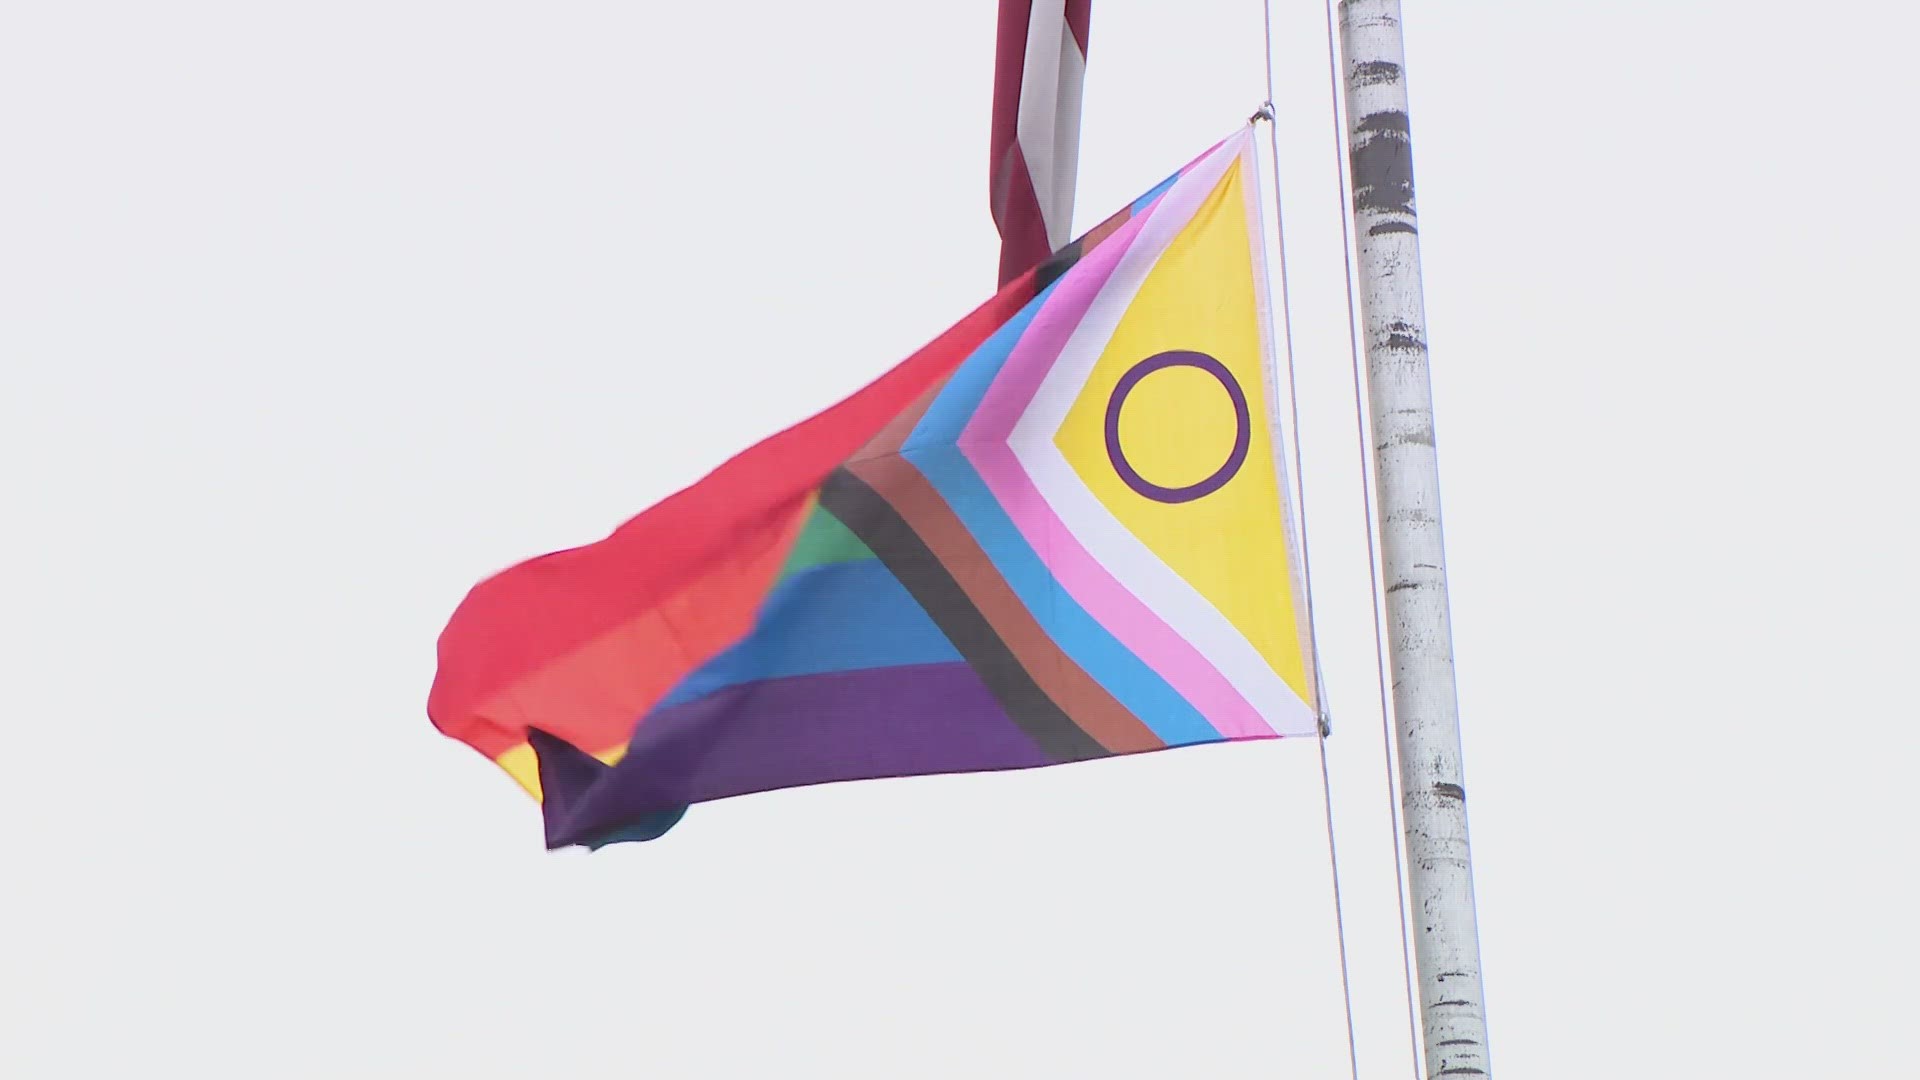 St. Louis City and County are standing in solidarity with the LGBTQIA+ community by raising Pride flags Thursday. June 1 kicks off the start of Pride Month.